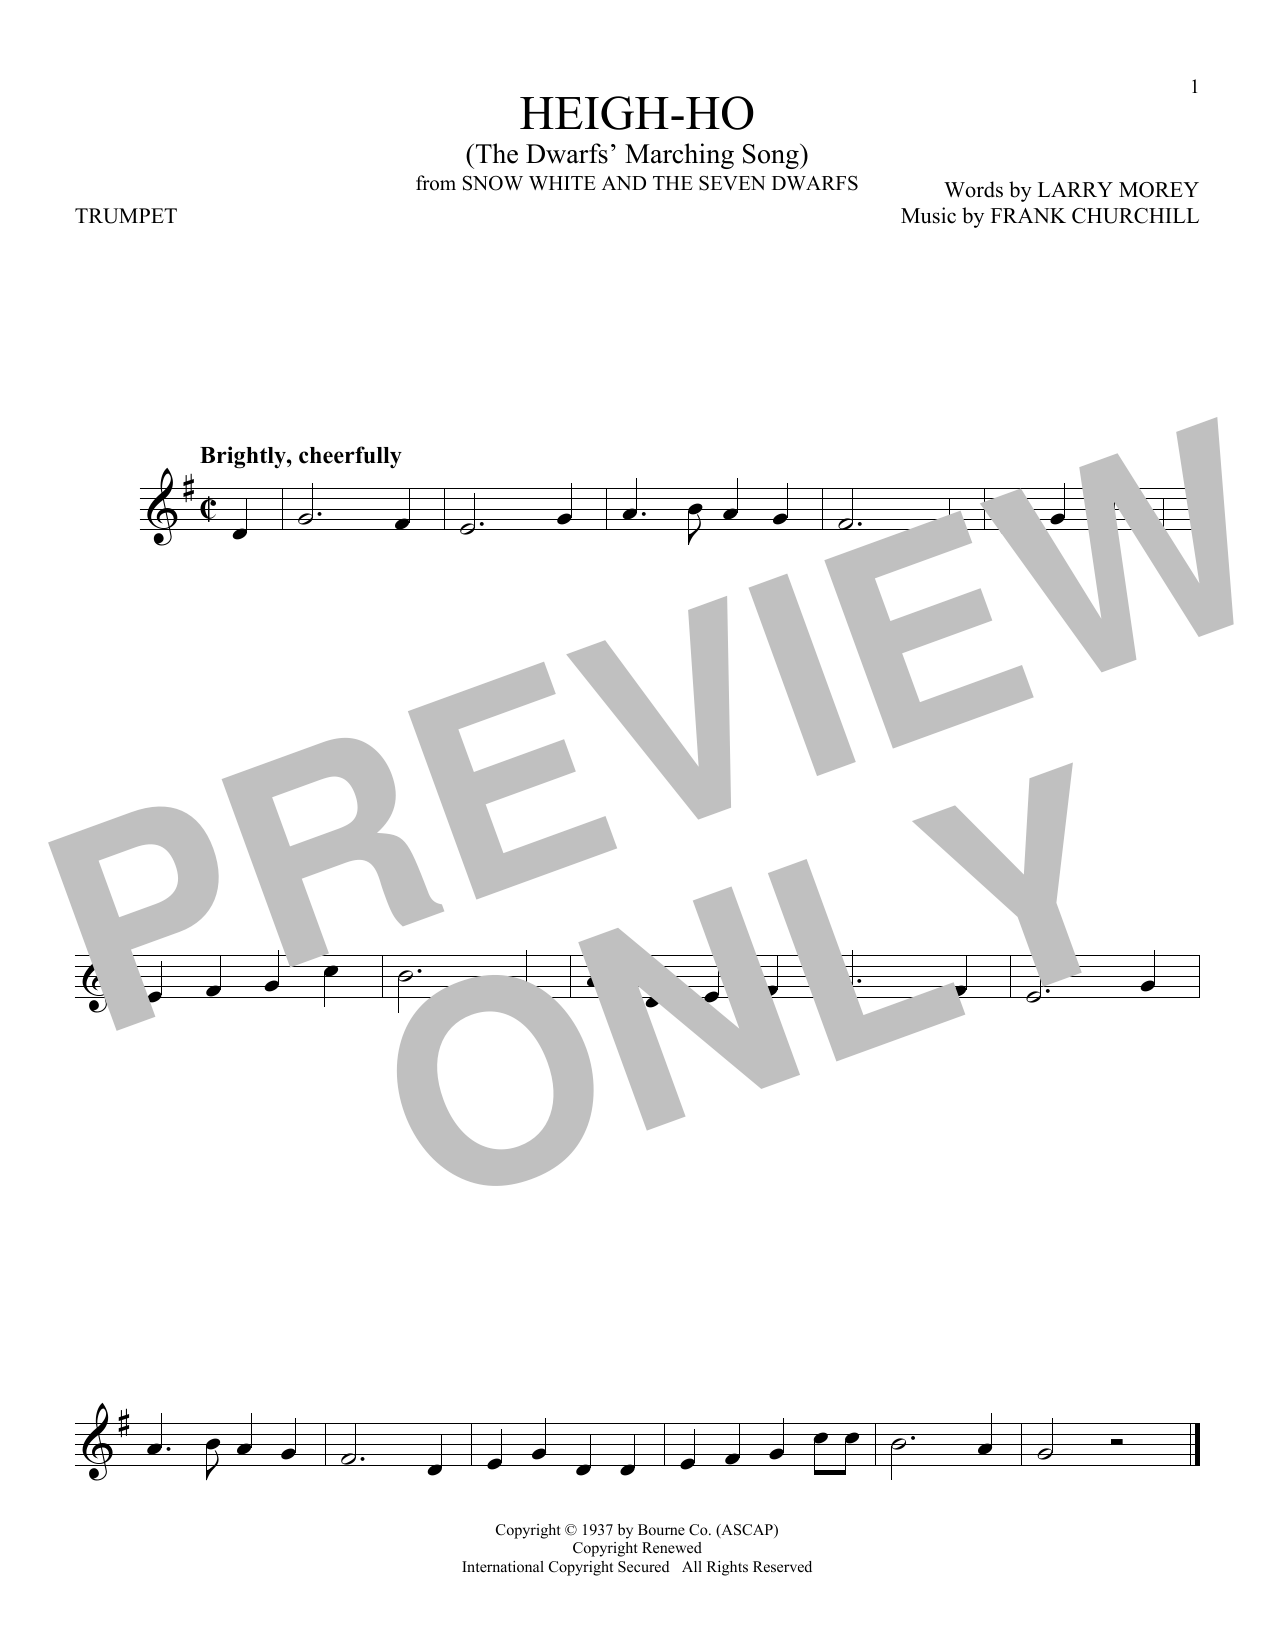 Download Larry Morey Heigh-Ho Sheet Music